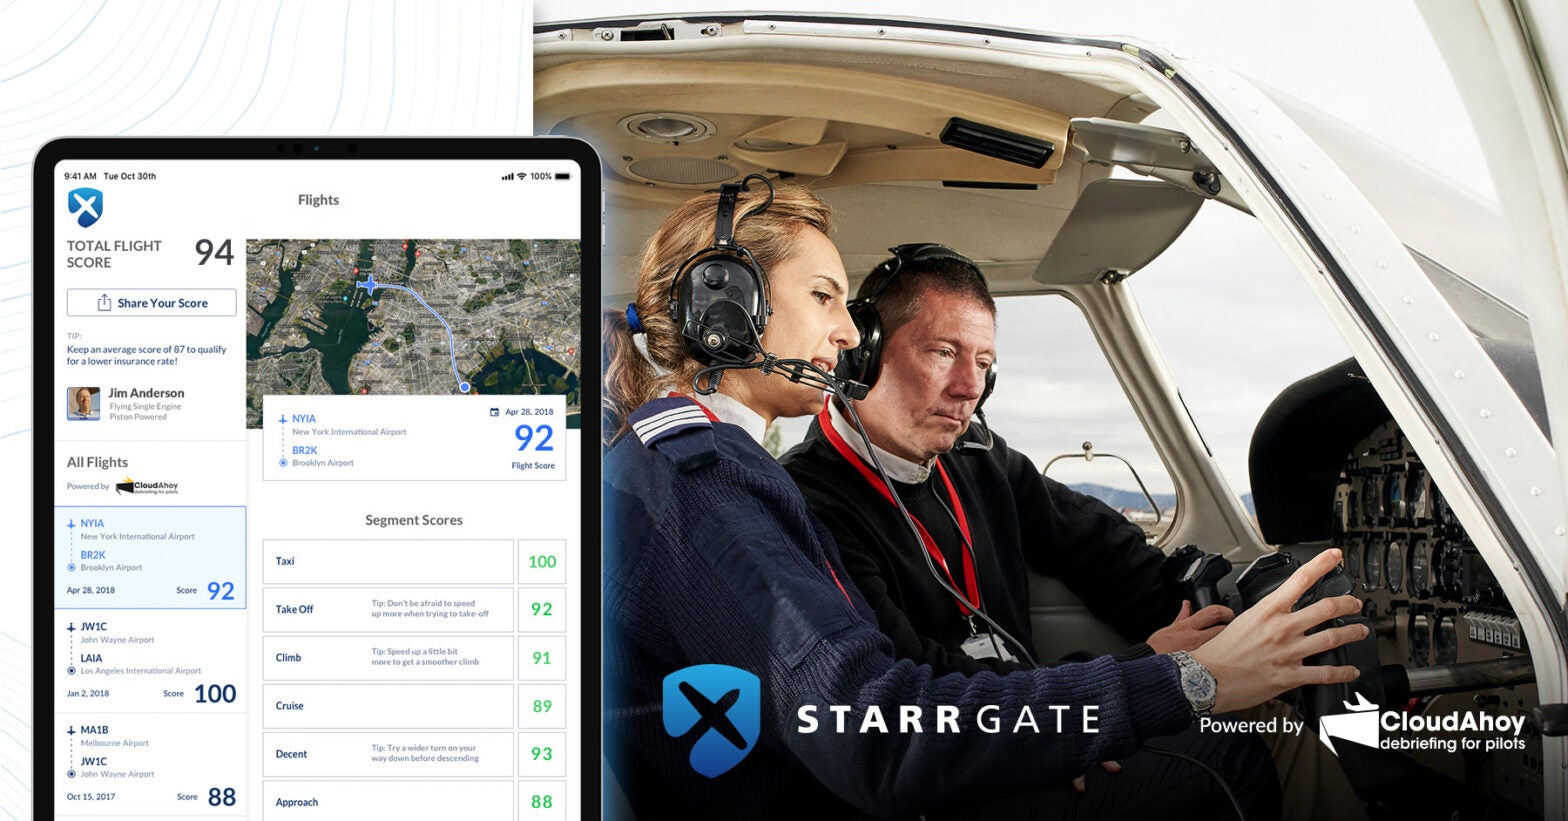 Starr Gate iPad App Makes Buying Aircraft Renters Insurance Effortless